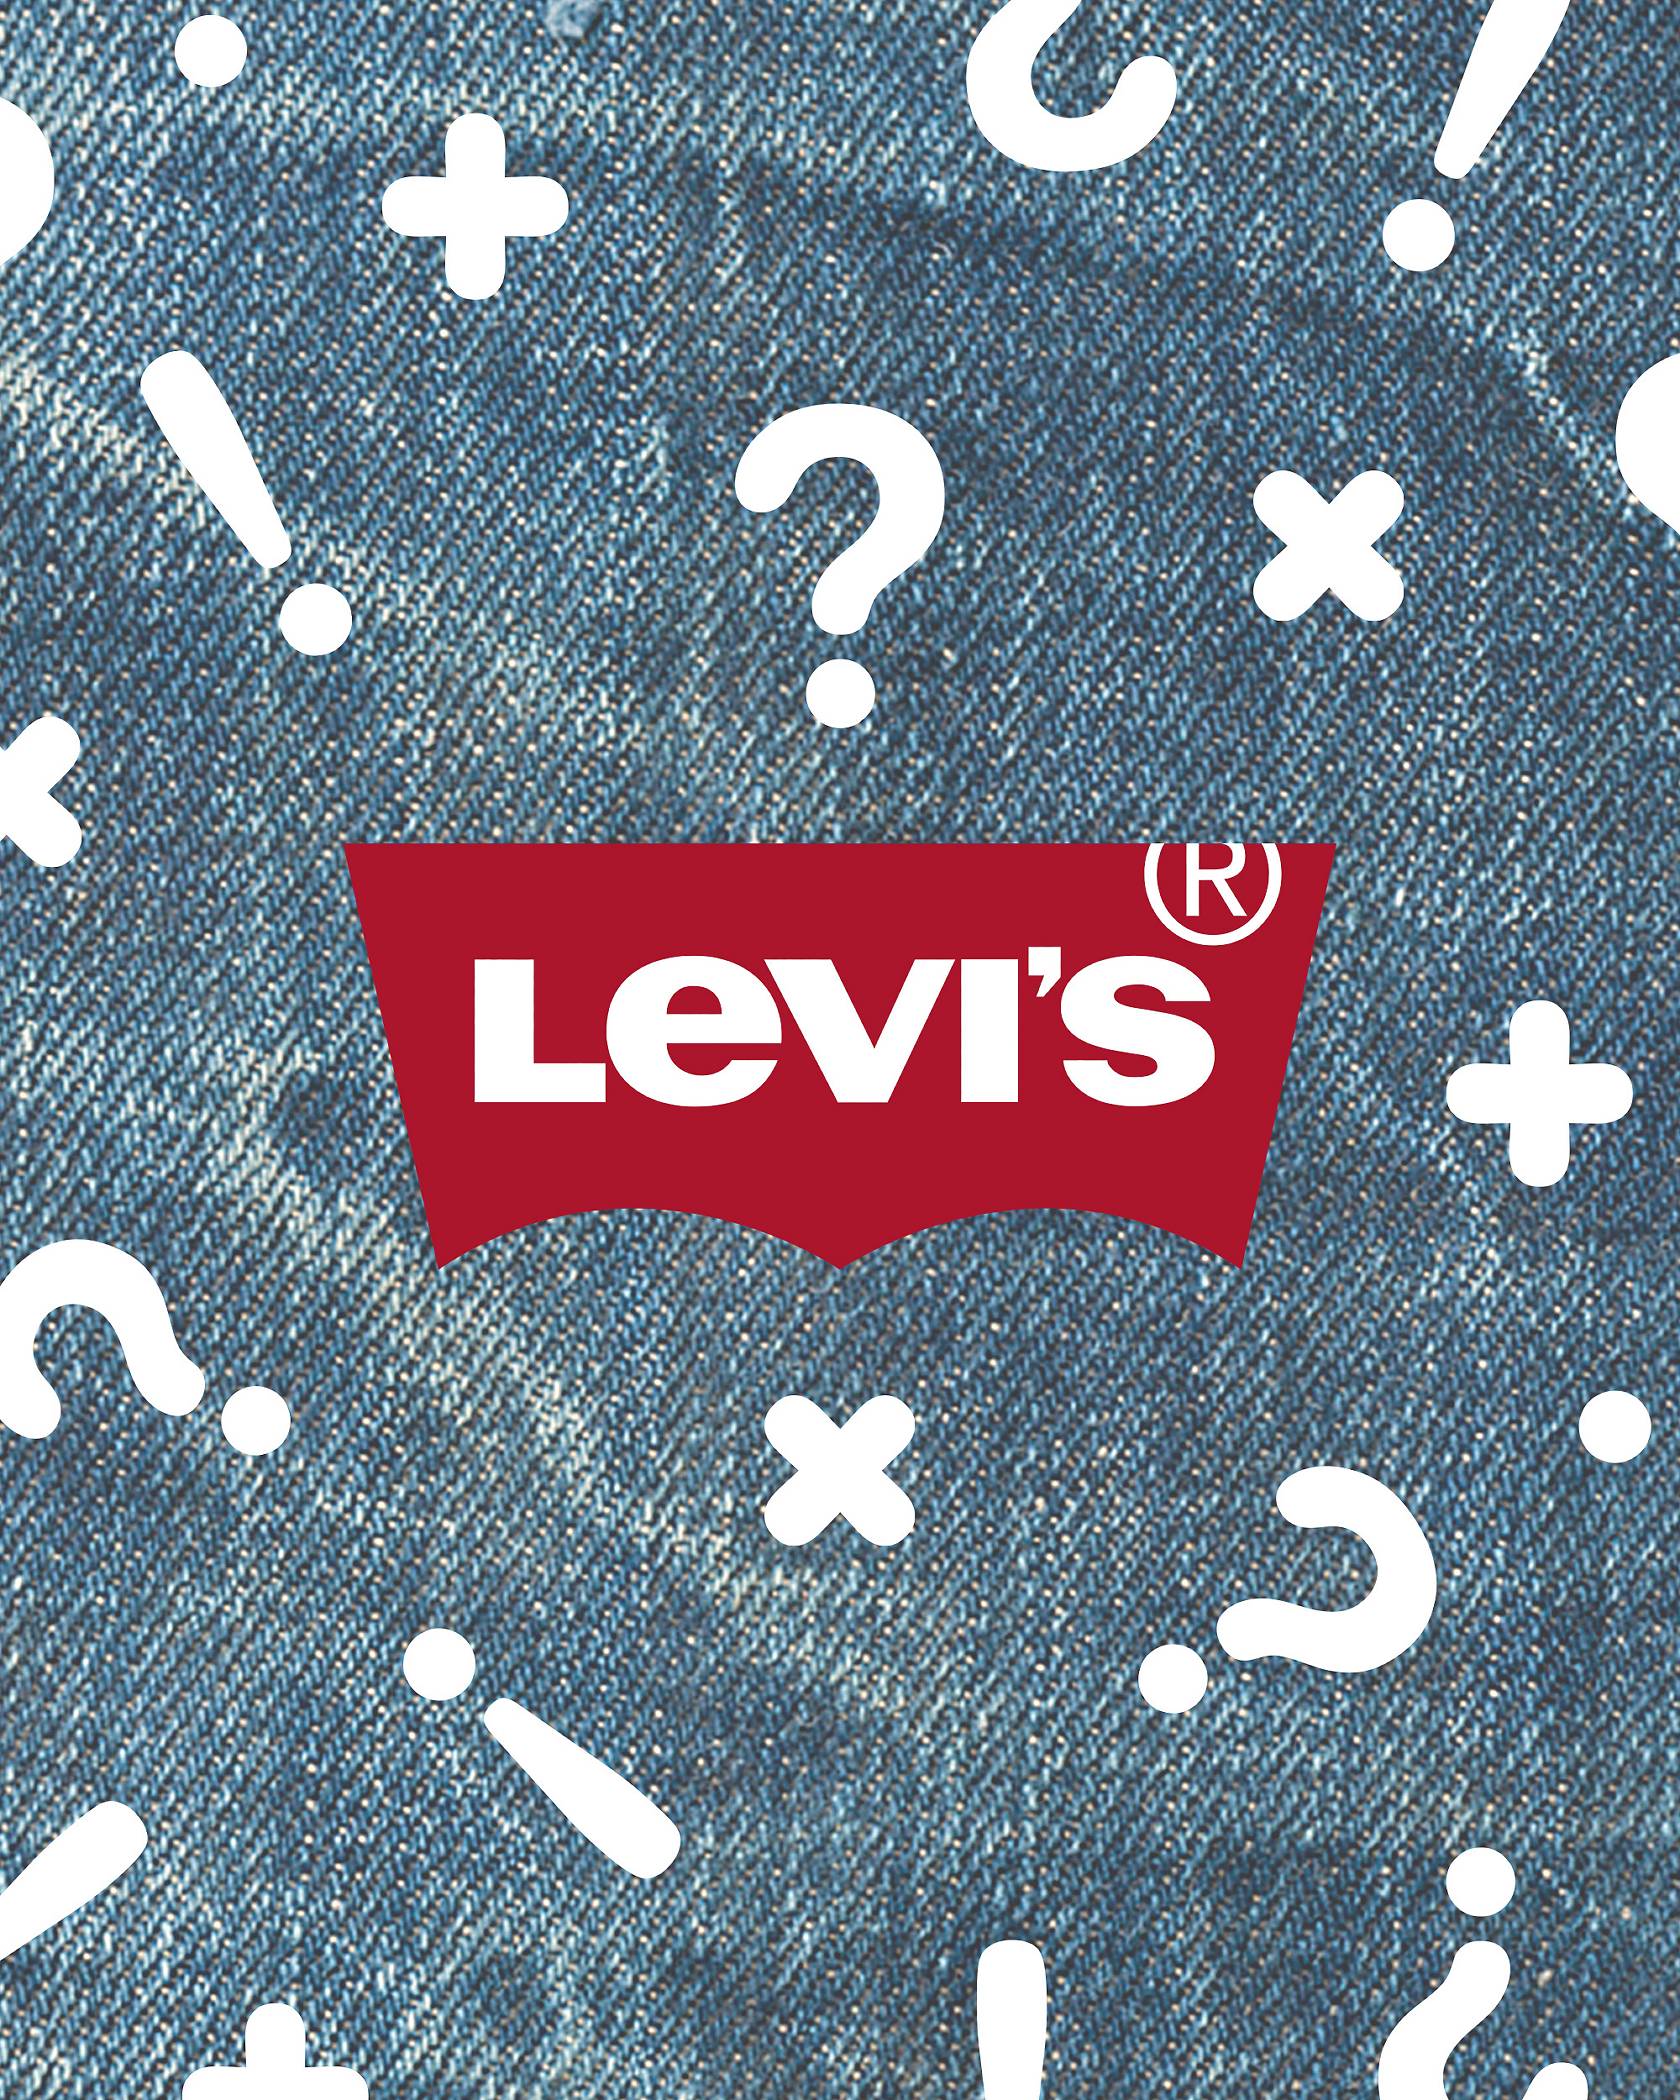 Denim background with white question marks, exclamation marks, and X's with the Levi's logo in the middle.